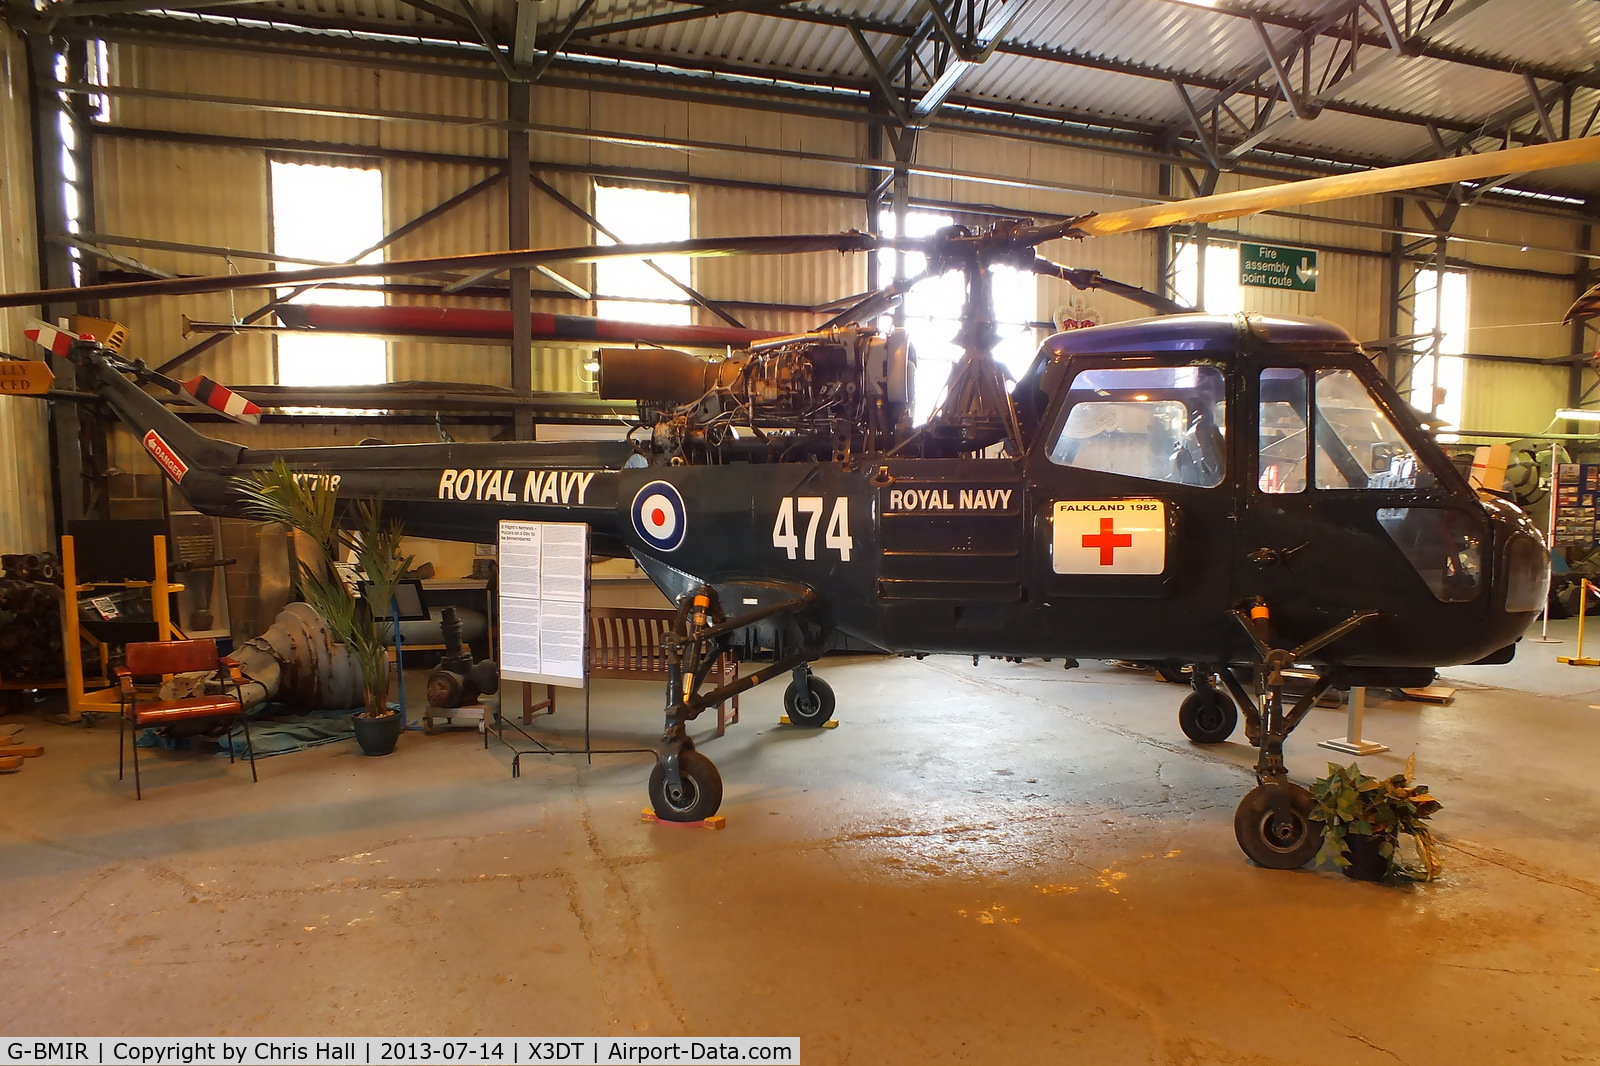 G-BMIR, 1967 Westland Wasp HAS.1 C/N F9670, preserved at the South Yorkshire Aircraft Museum, AeroVenture, Doncaster